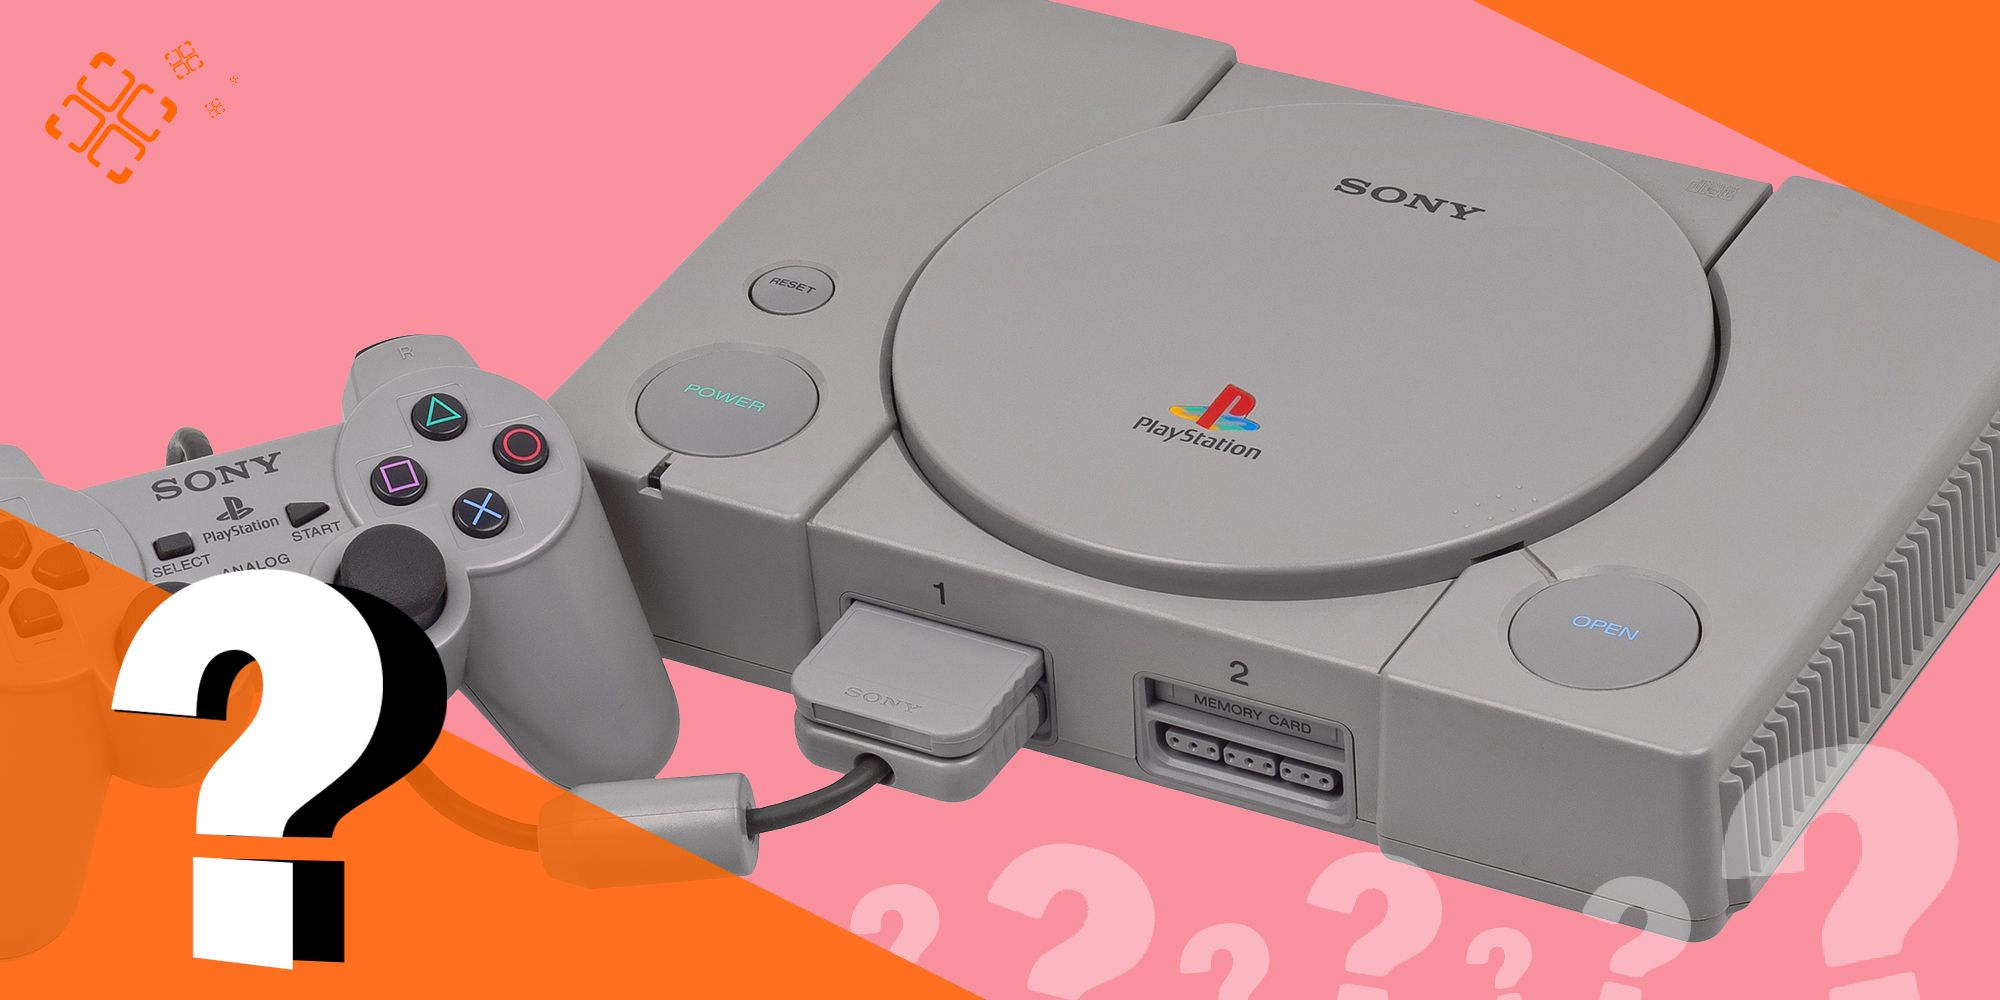 The Big Question What's The Best Console Ever Made?